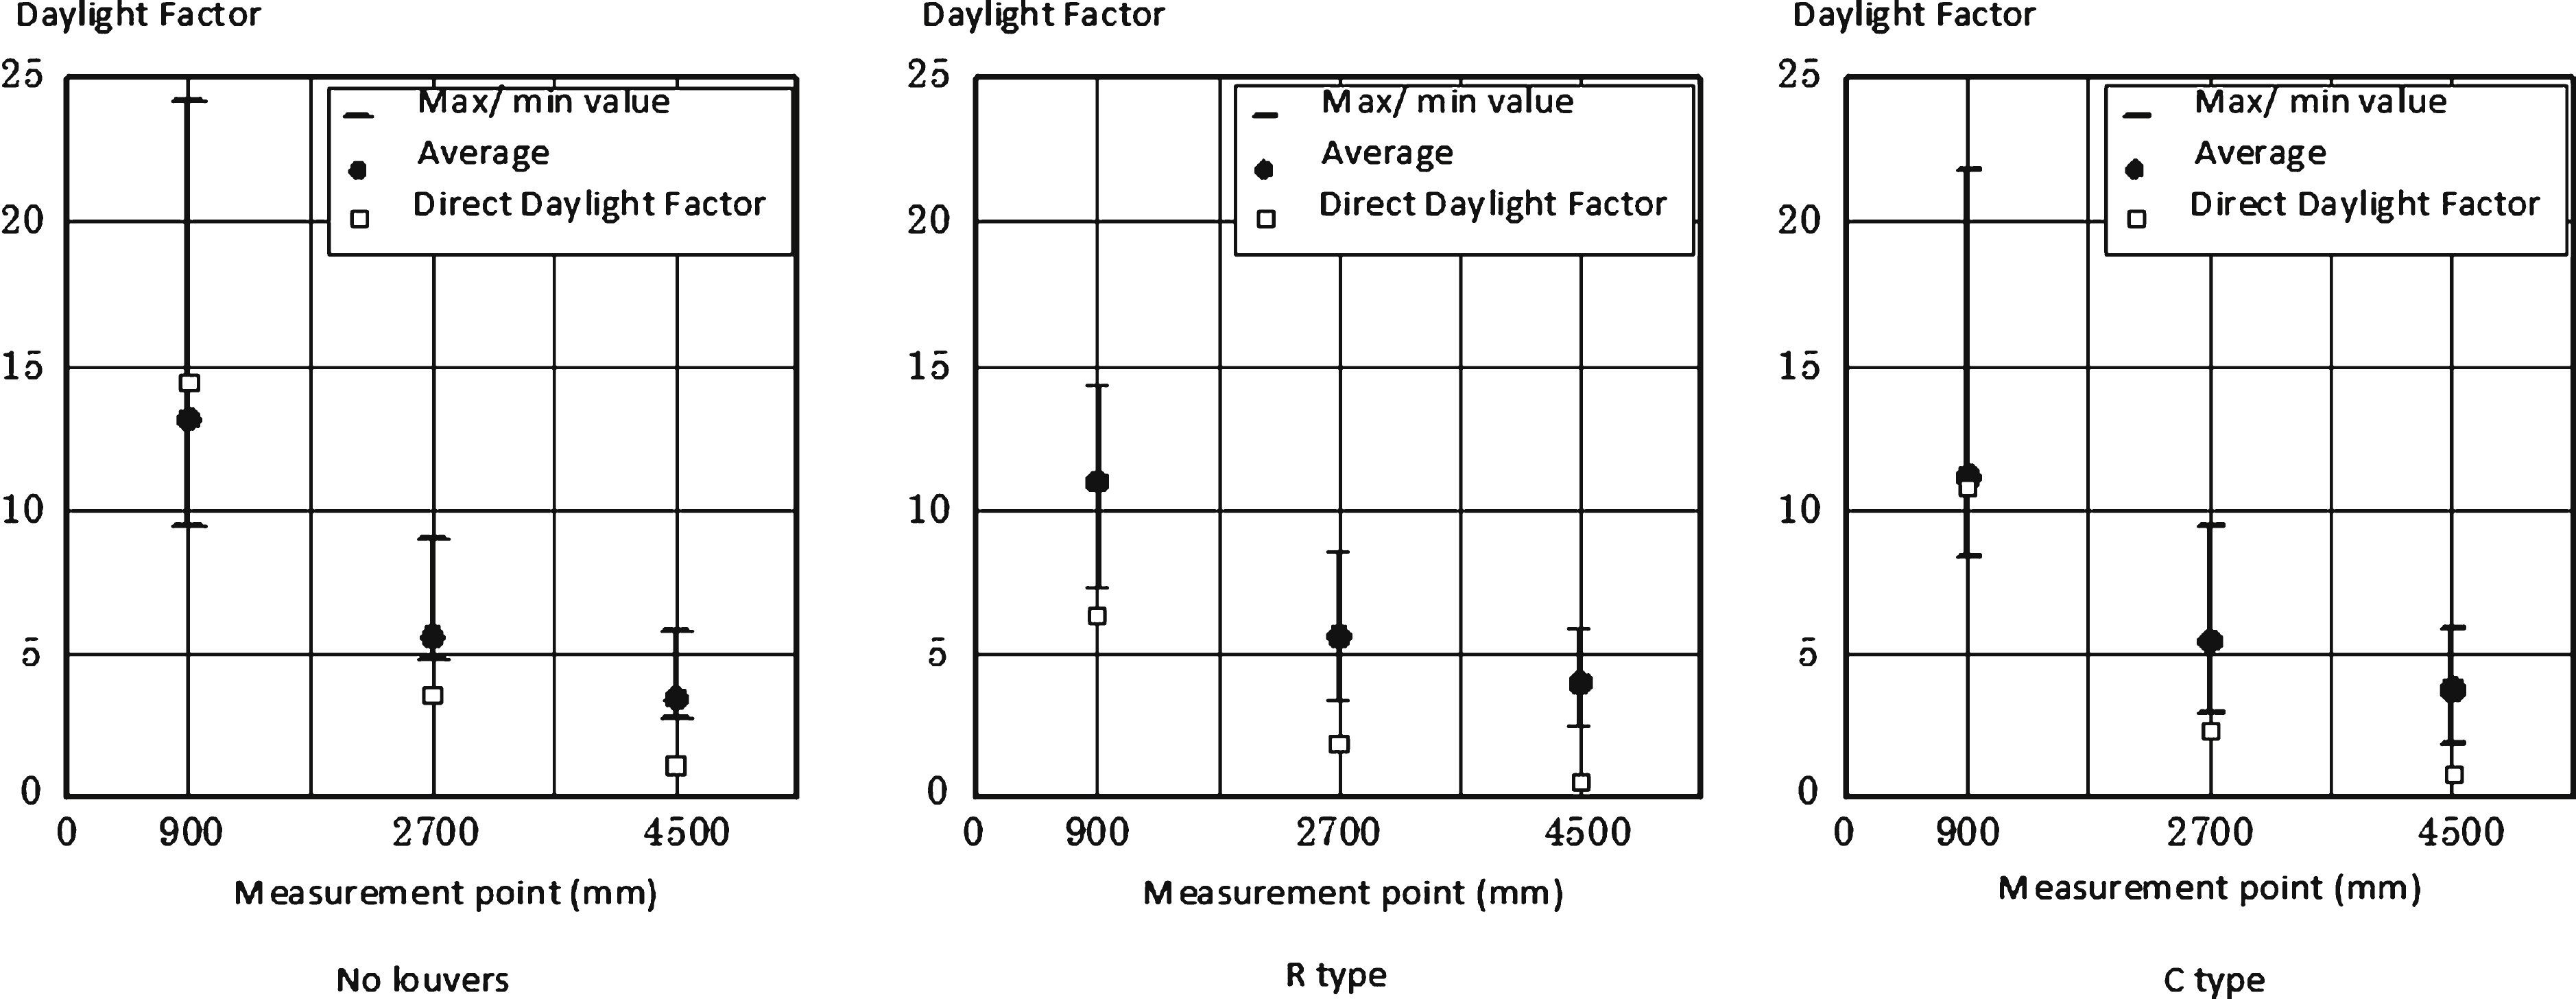 Measurement results (daylight factor % ).